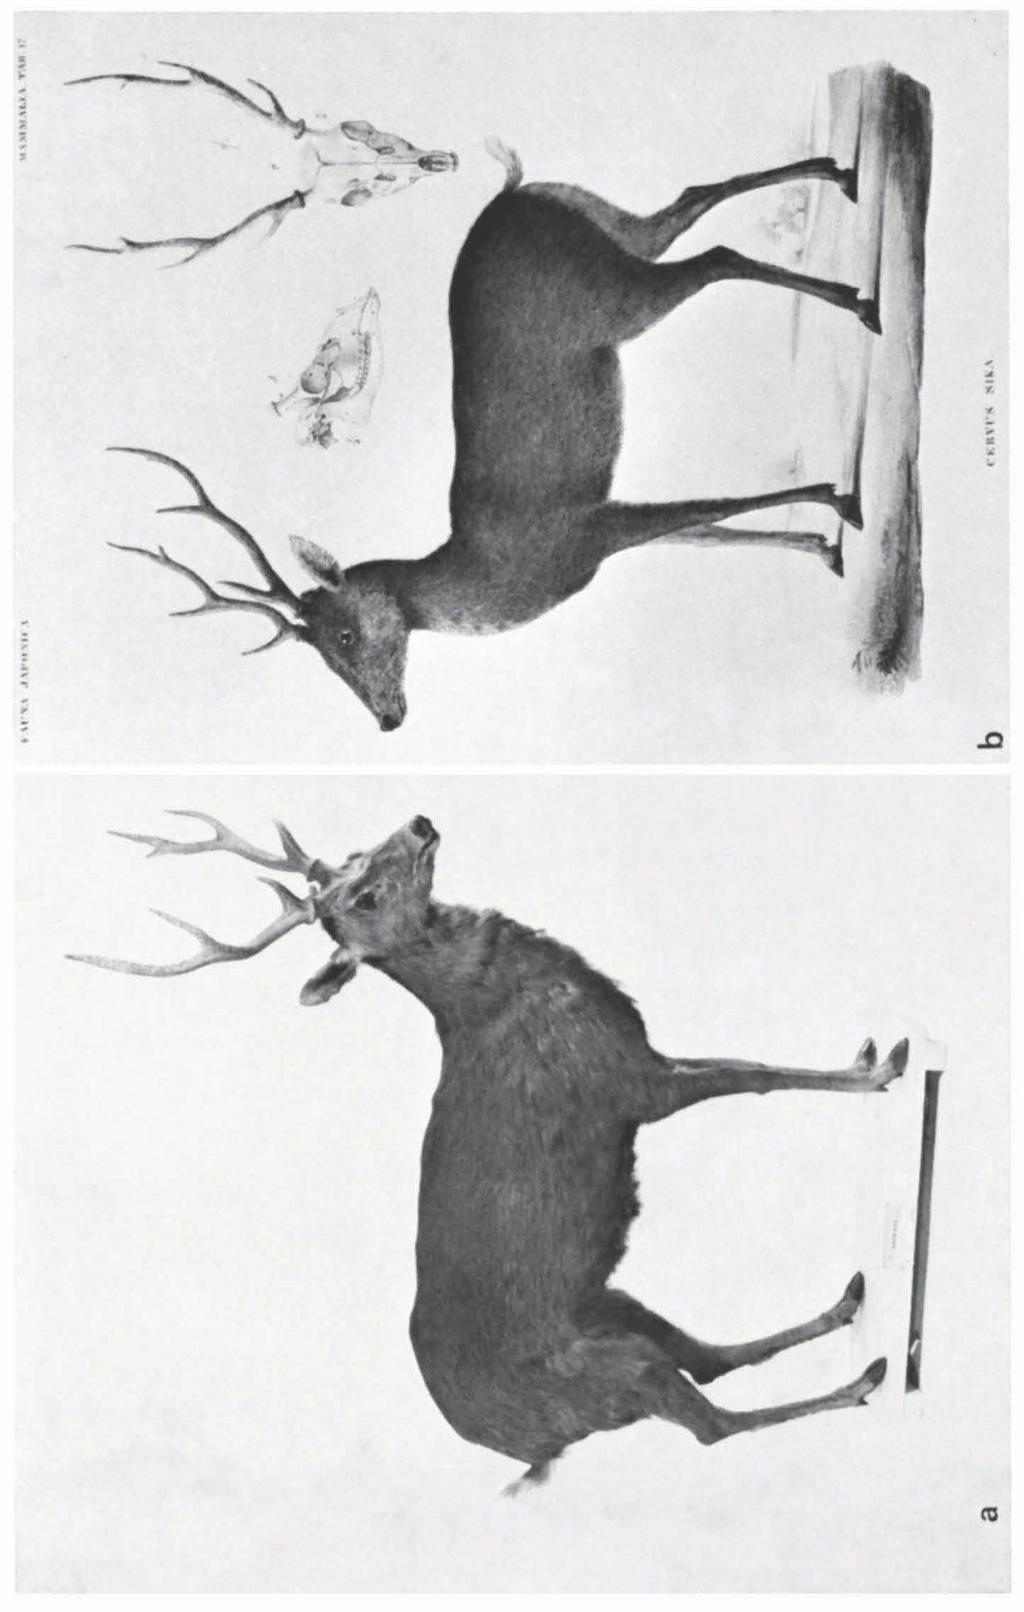 Fig. a. RMNH reg. nr. 25987, lectotype of Cervus nippon Temminck, 1836 and of Cervus sika Temminck, 1844; Cat. syst, a, figured in Fauna Japonica, pl. 17.